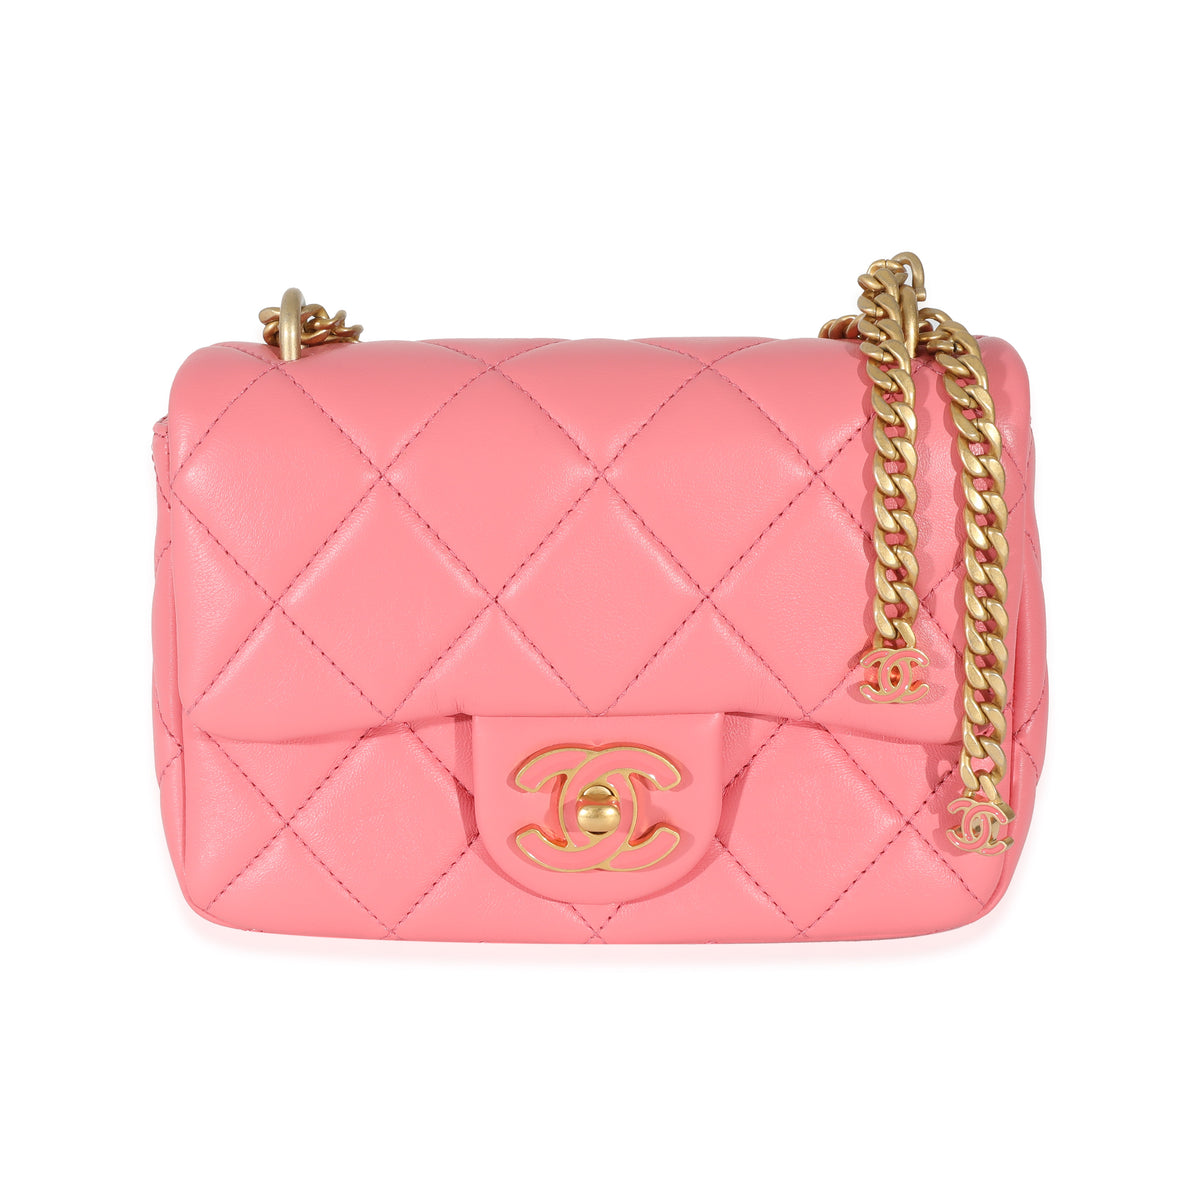 How Much Is A Chanel Bag?, myGemma